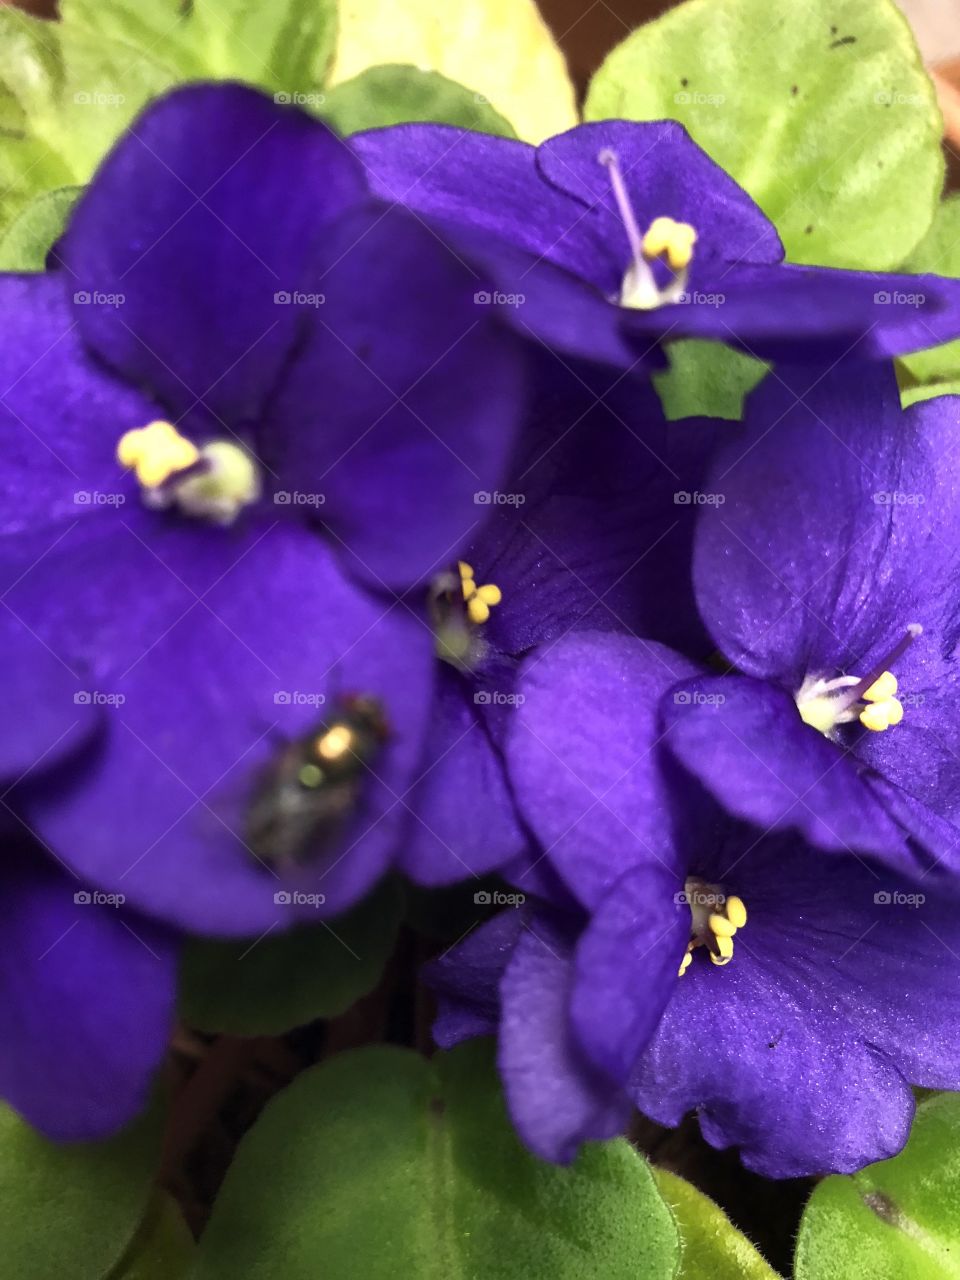 Extreme close up of purple flowers.